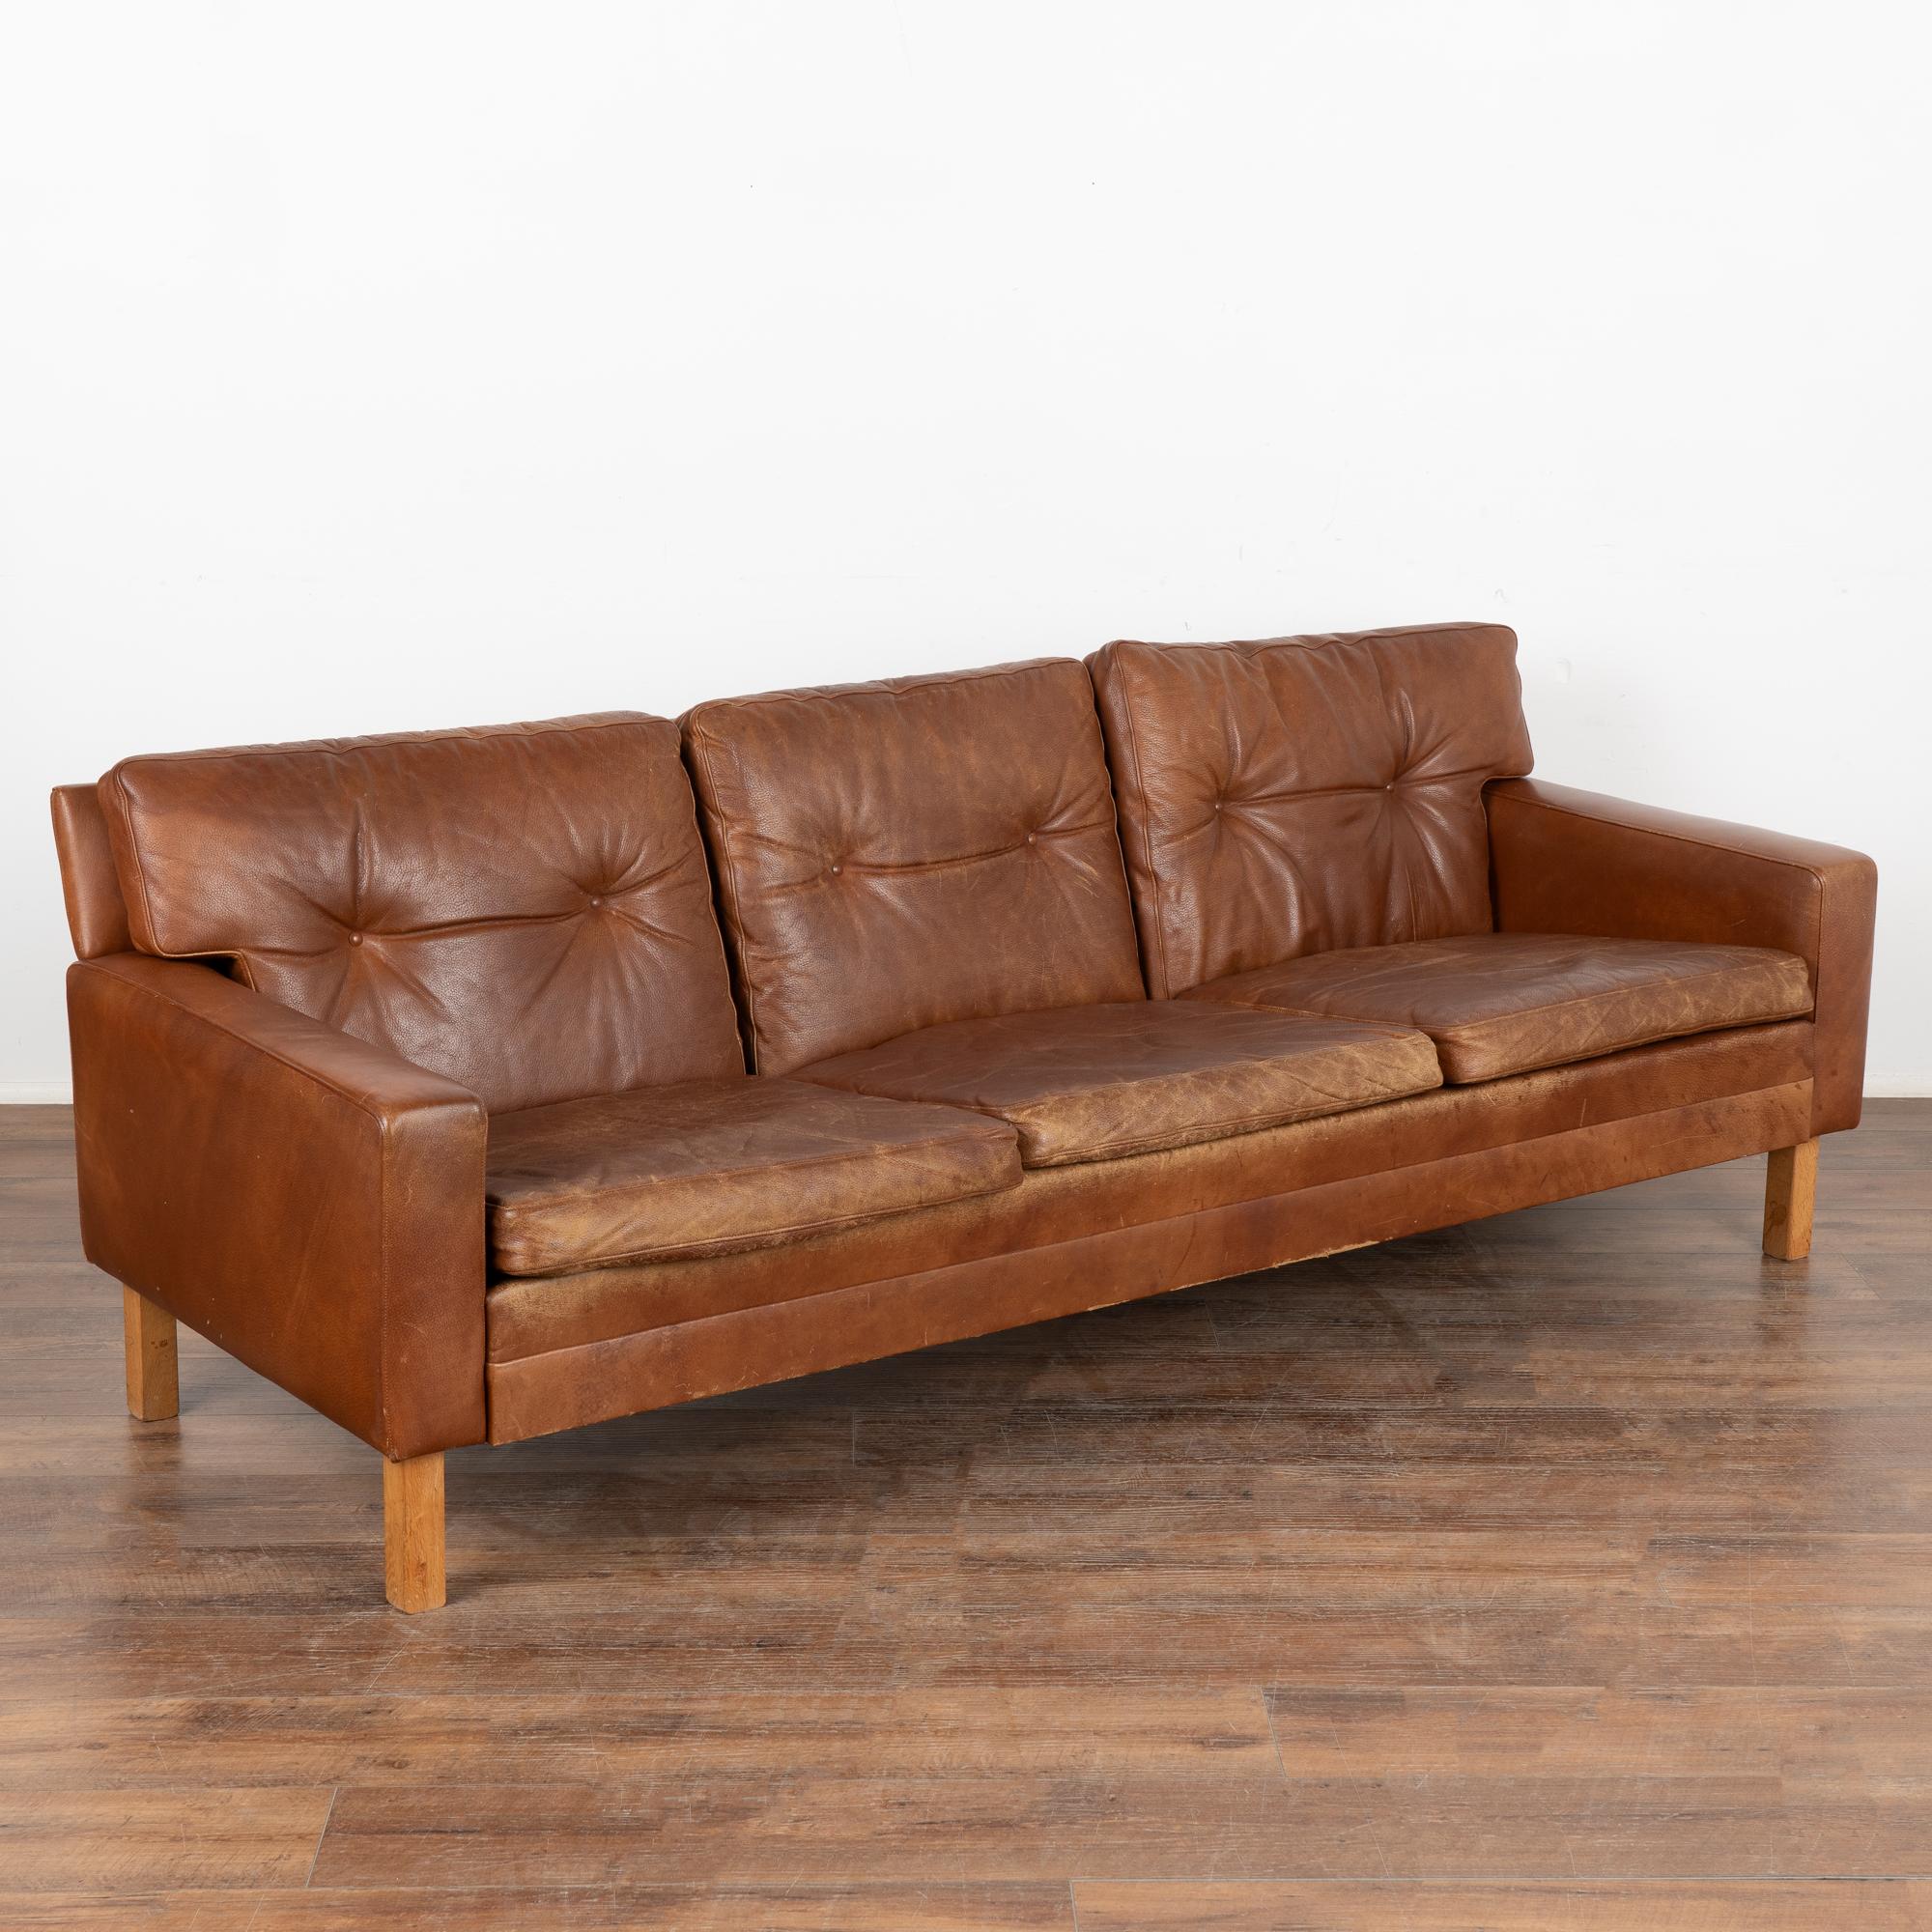 Mid-century modern brown leather three-seat sofa with button tufted back and loose seat cushions. No makers mark.
The years of use are revealed in the aged patina of the leather, including impressions, scuffs/scratches, discolorations (especially